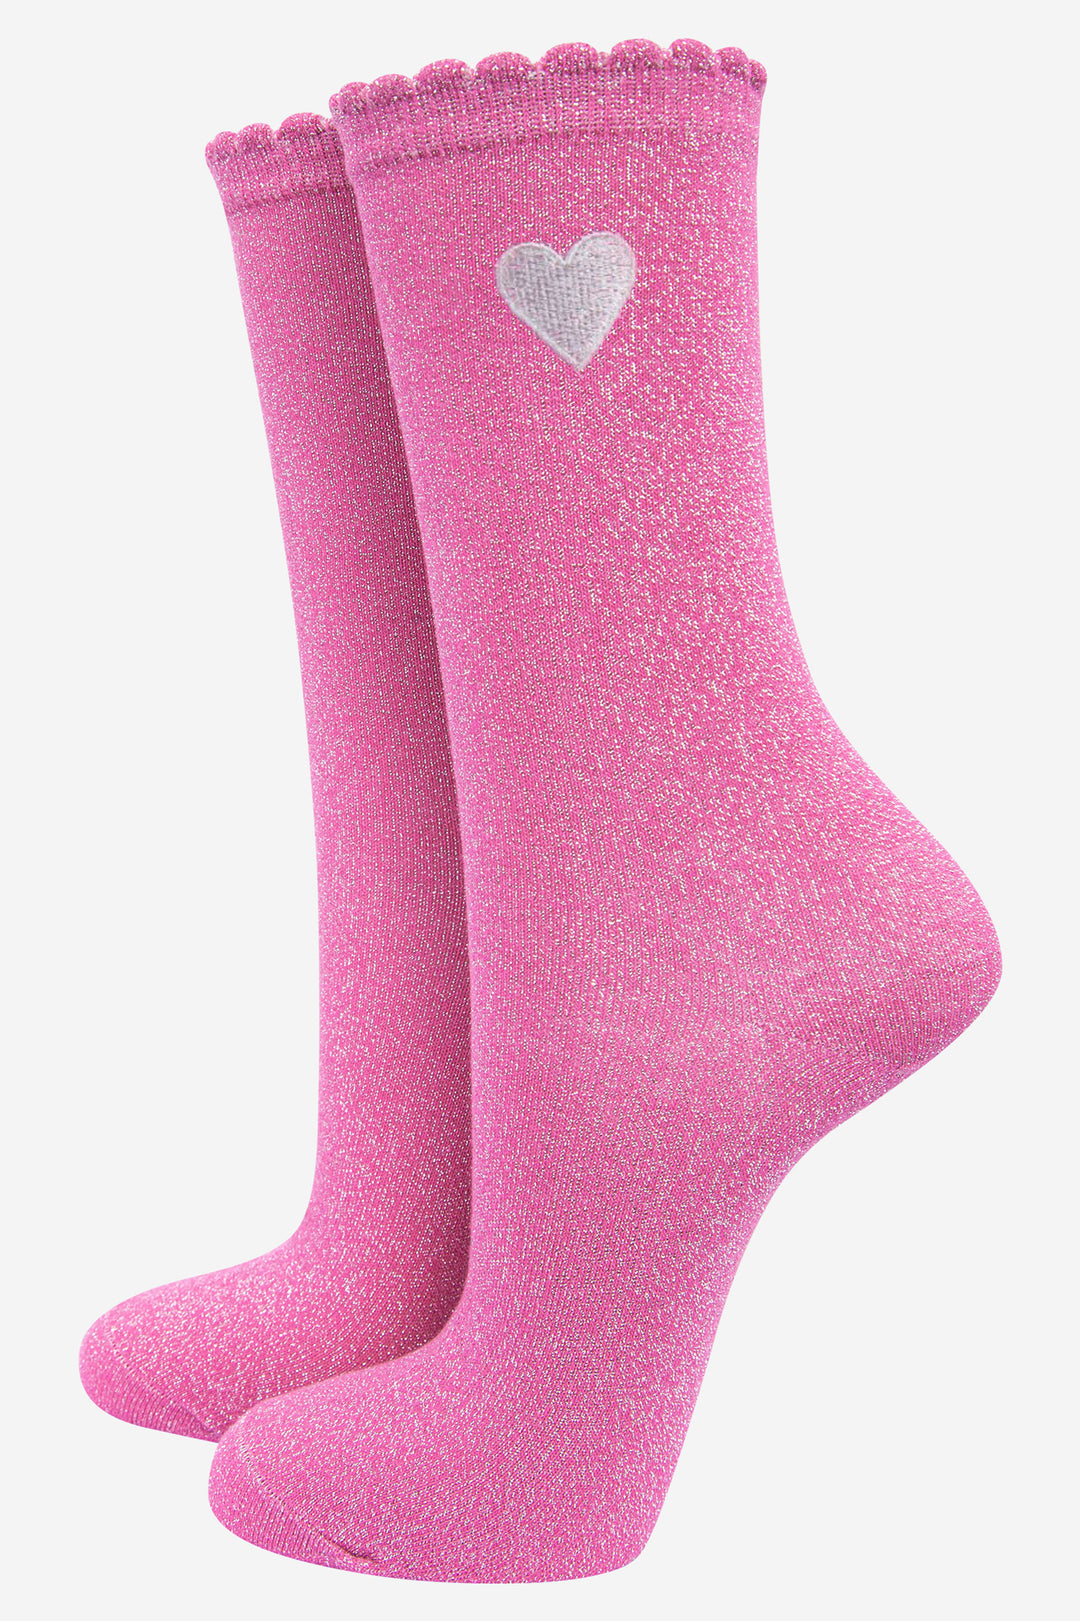 Womens Pink Glitter Socks Embroidered Heart Ankle Socks Sparkly Shimmer Fuchsia with Scalloped Cuff